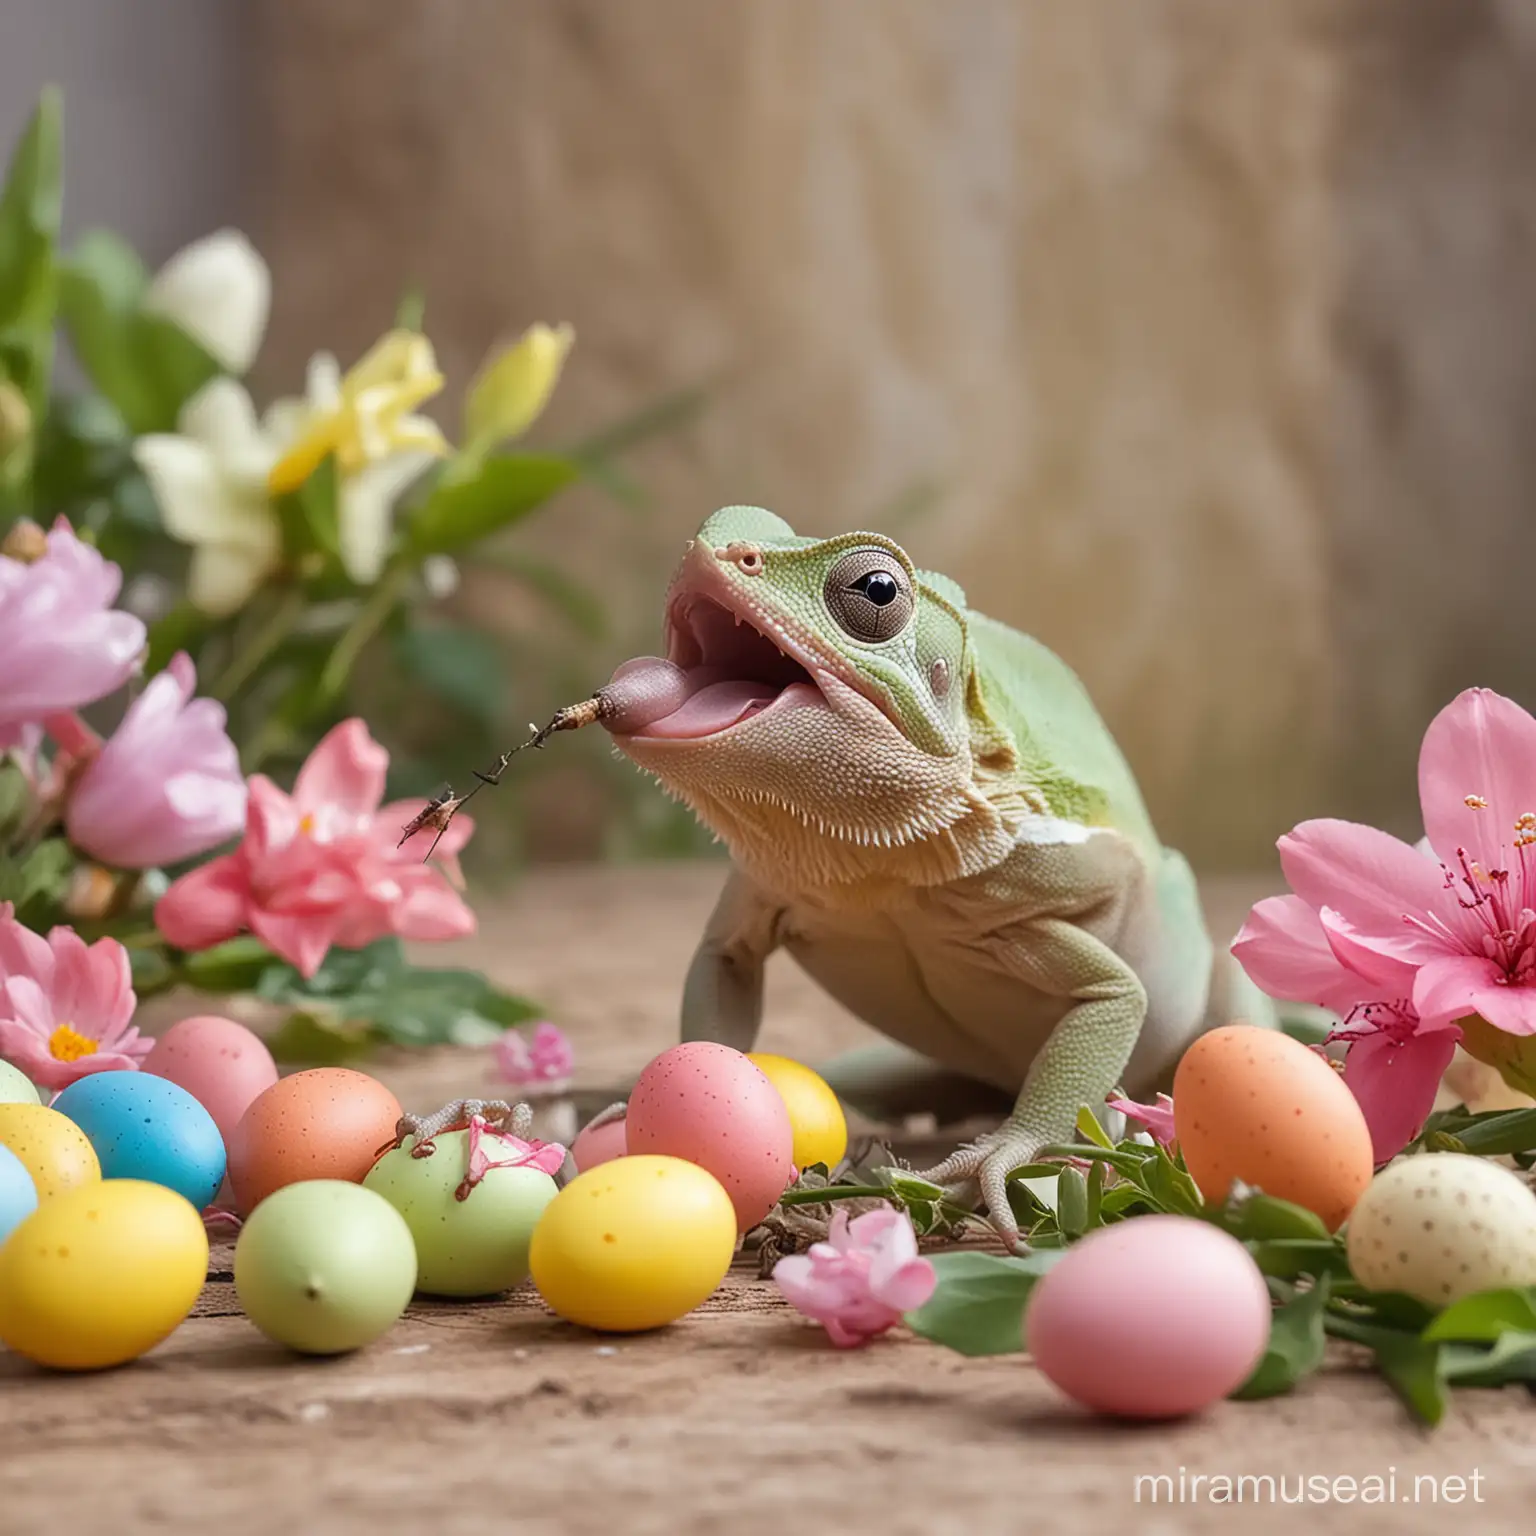 Chameleon Tongue Snatching Fly Amidst Easter Eggs and Spring Blossoms